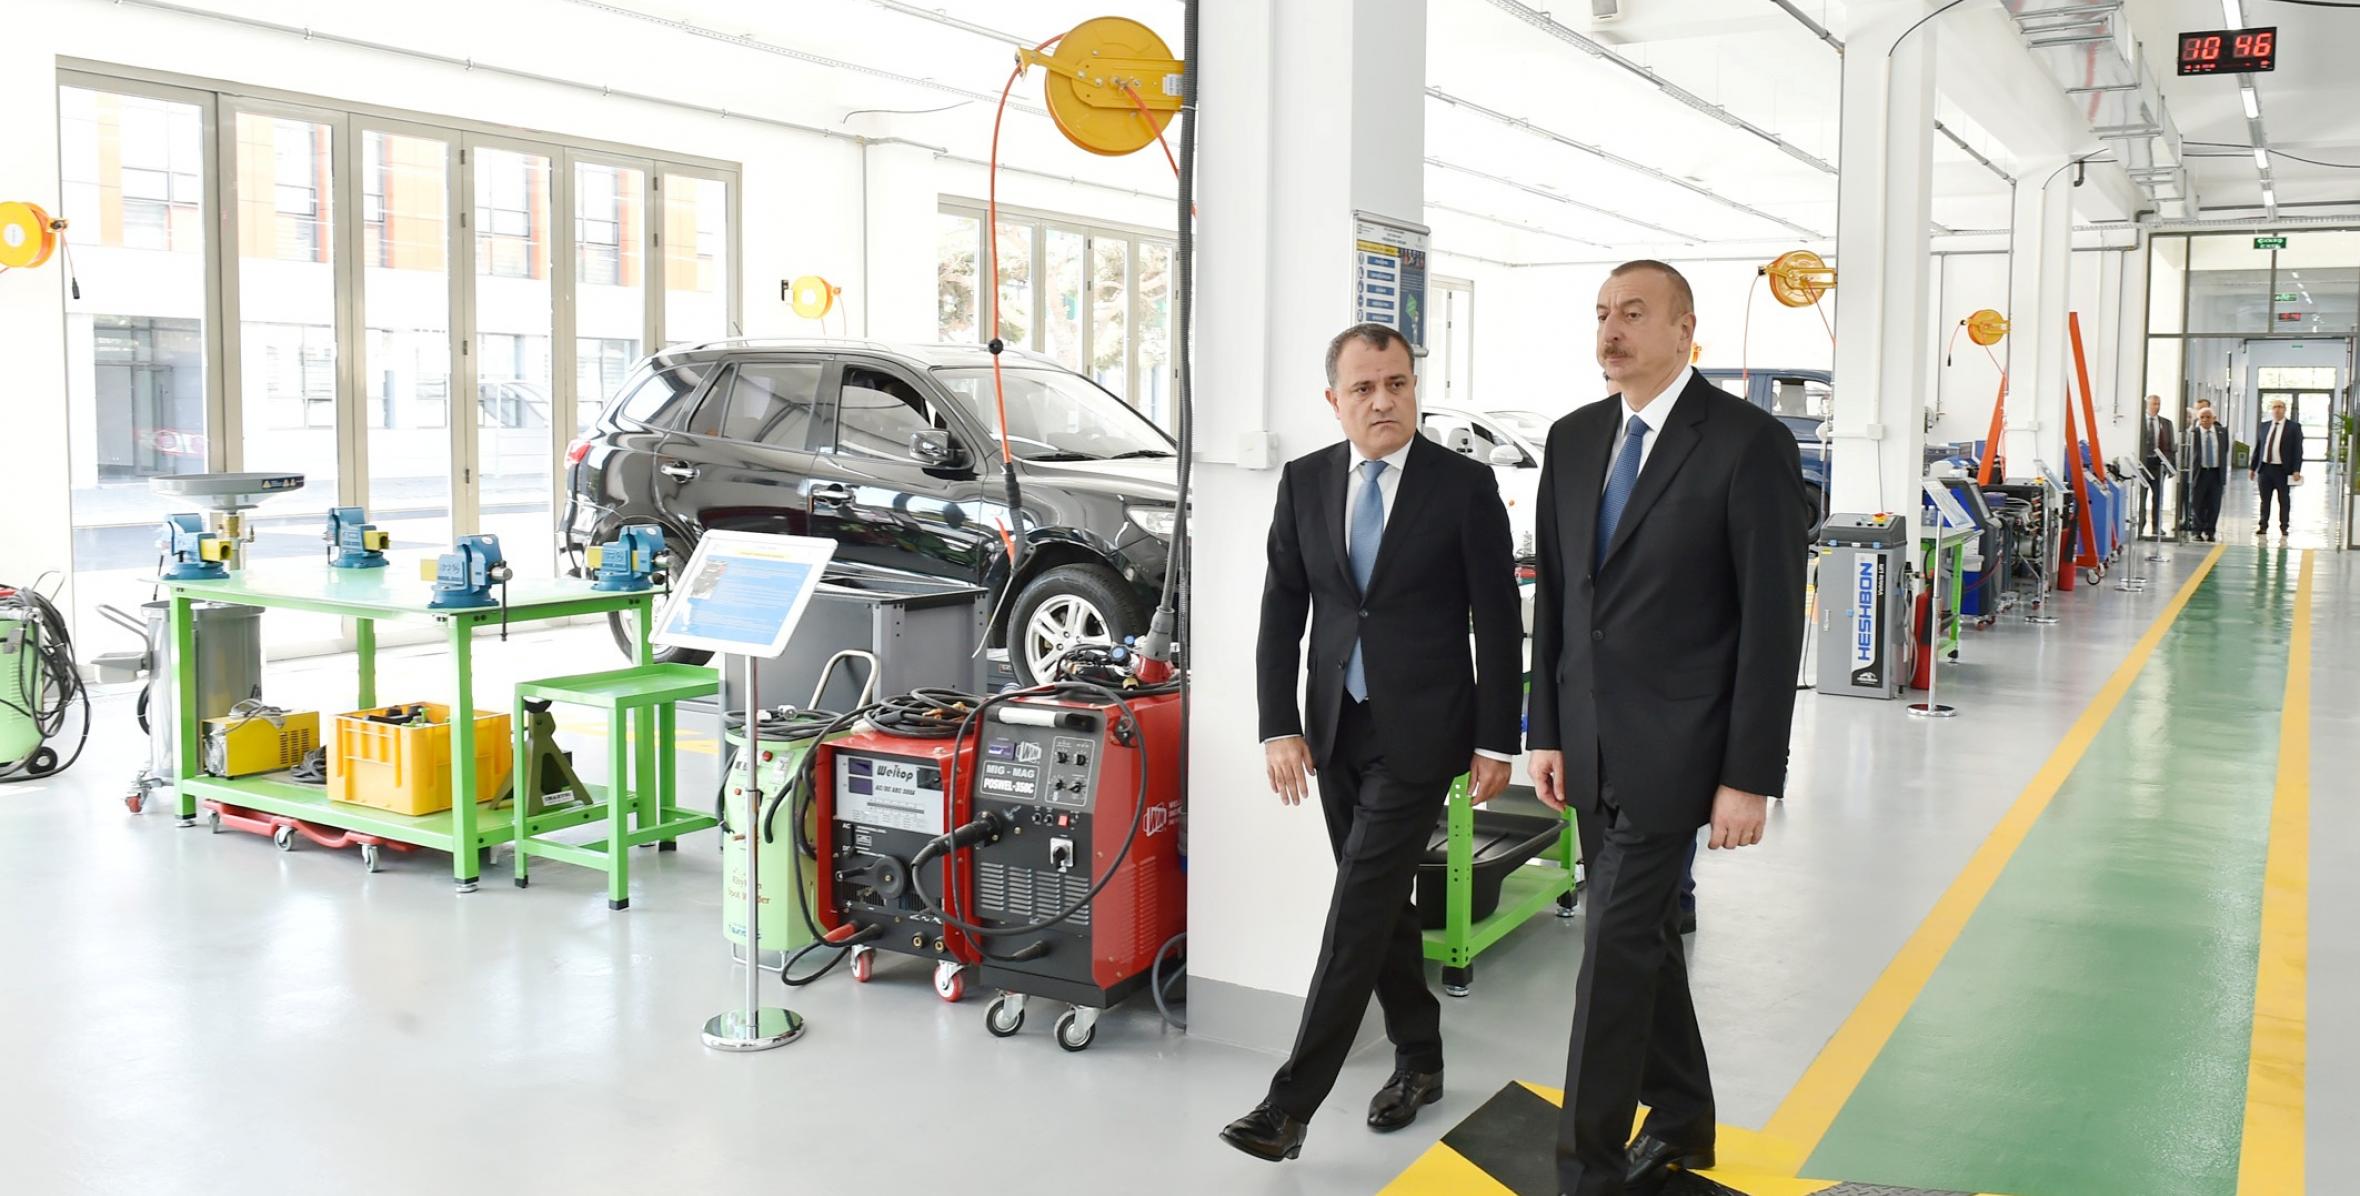 Ilham Aliyev inaugurated Baku State Vocational Education Centre on Industry and Innovation